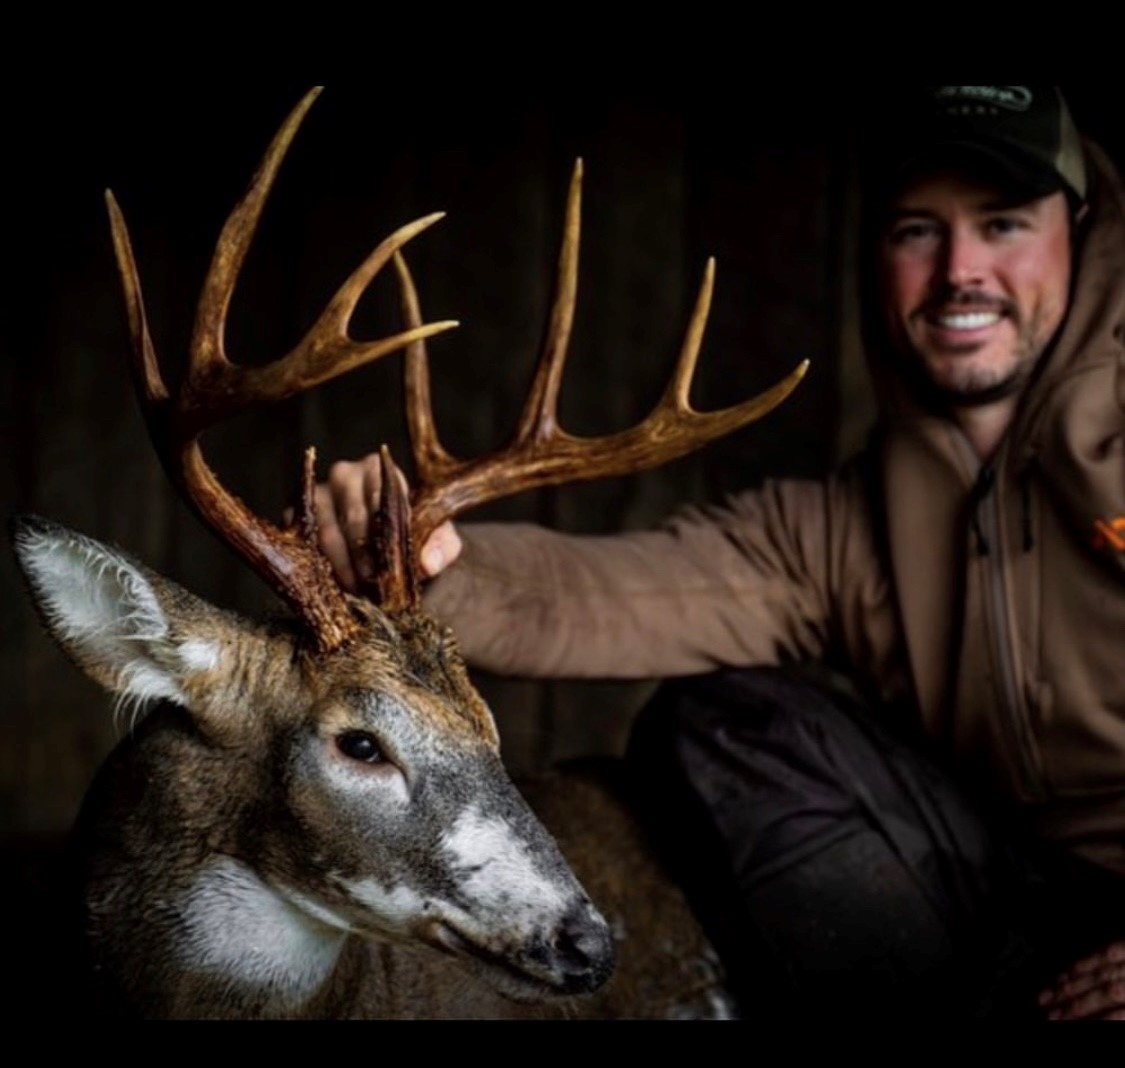 Check out this absolute beautiful buck Rob @robbystenger was fortunate enough to take after watching him mature for 4-years. Way to go Rob, definitely a buck of a lifetime. #hunting #deer #deerhunting #whitetails #whitetailhunting #whitetailbuck #bigbuck #deerhuntingseason